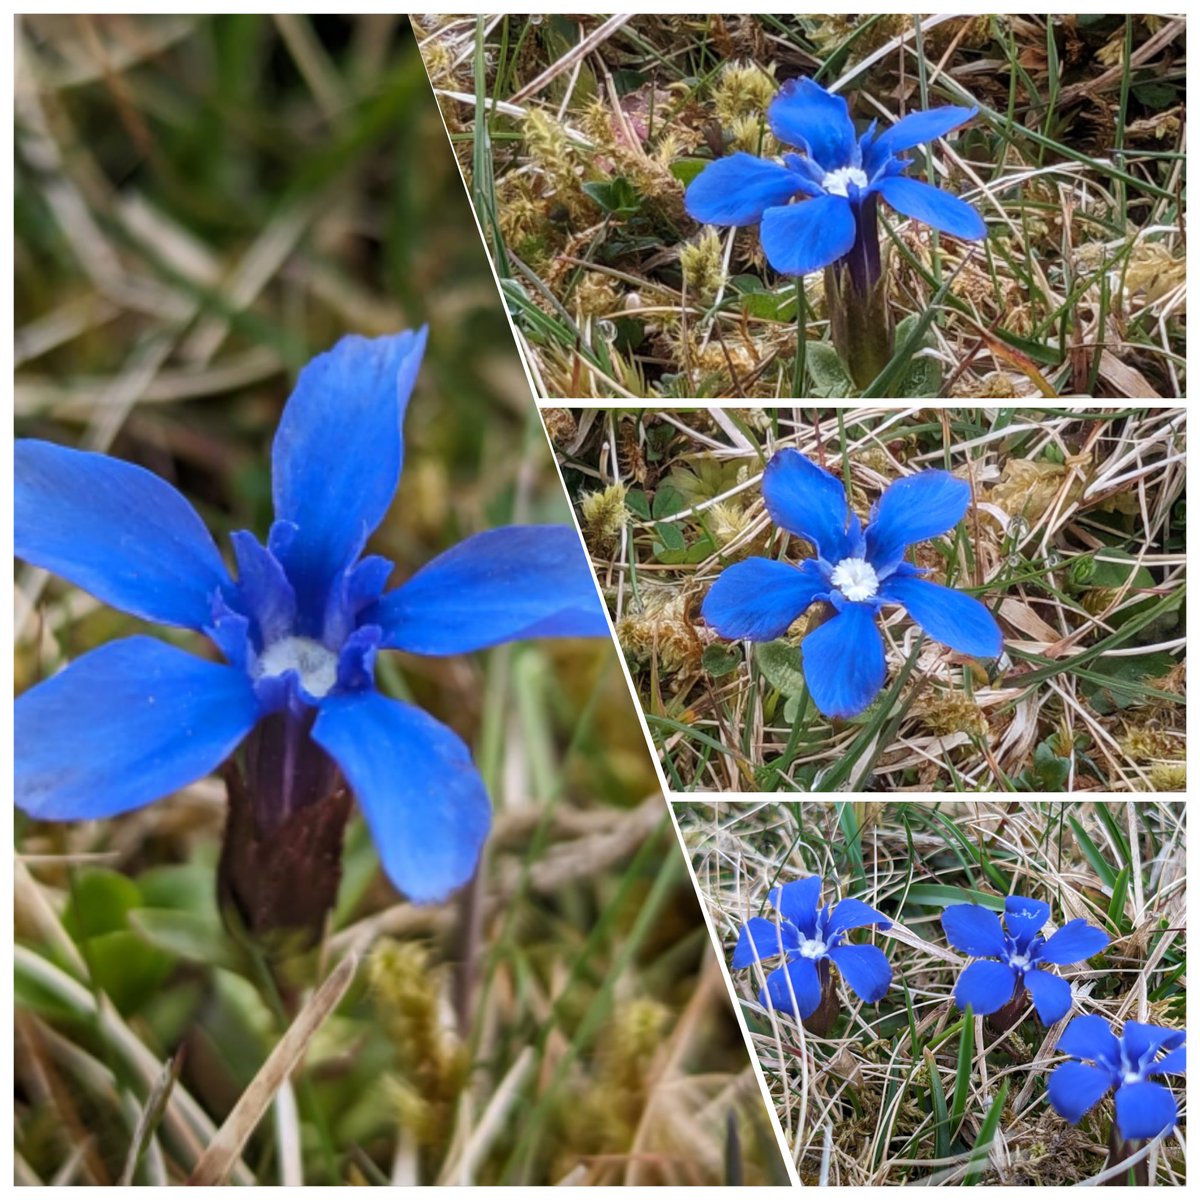 Fell in love with Spring Gentian (Gentiana verna) all over again on today's trip to #Teesdale. Hundreds of these little dazzlers on show - well worth the afternoon soaking!